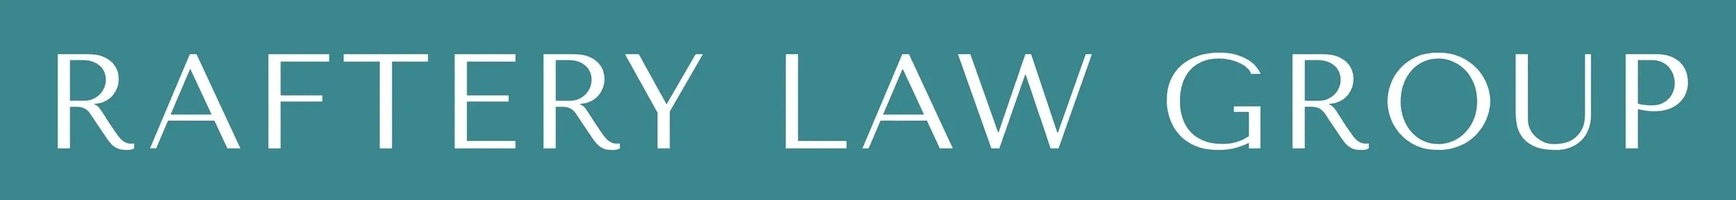 RAFTERY LAW GROUP